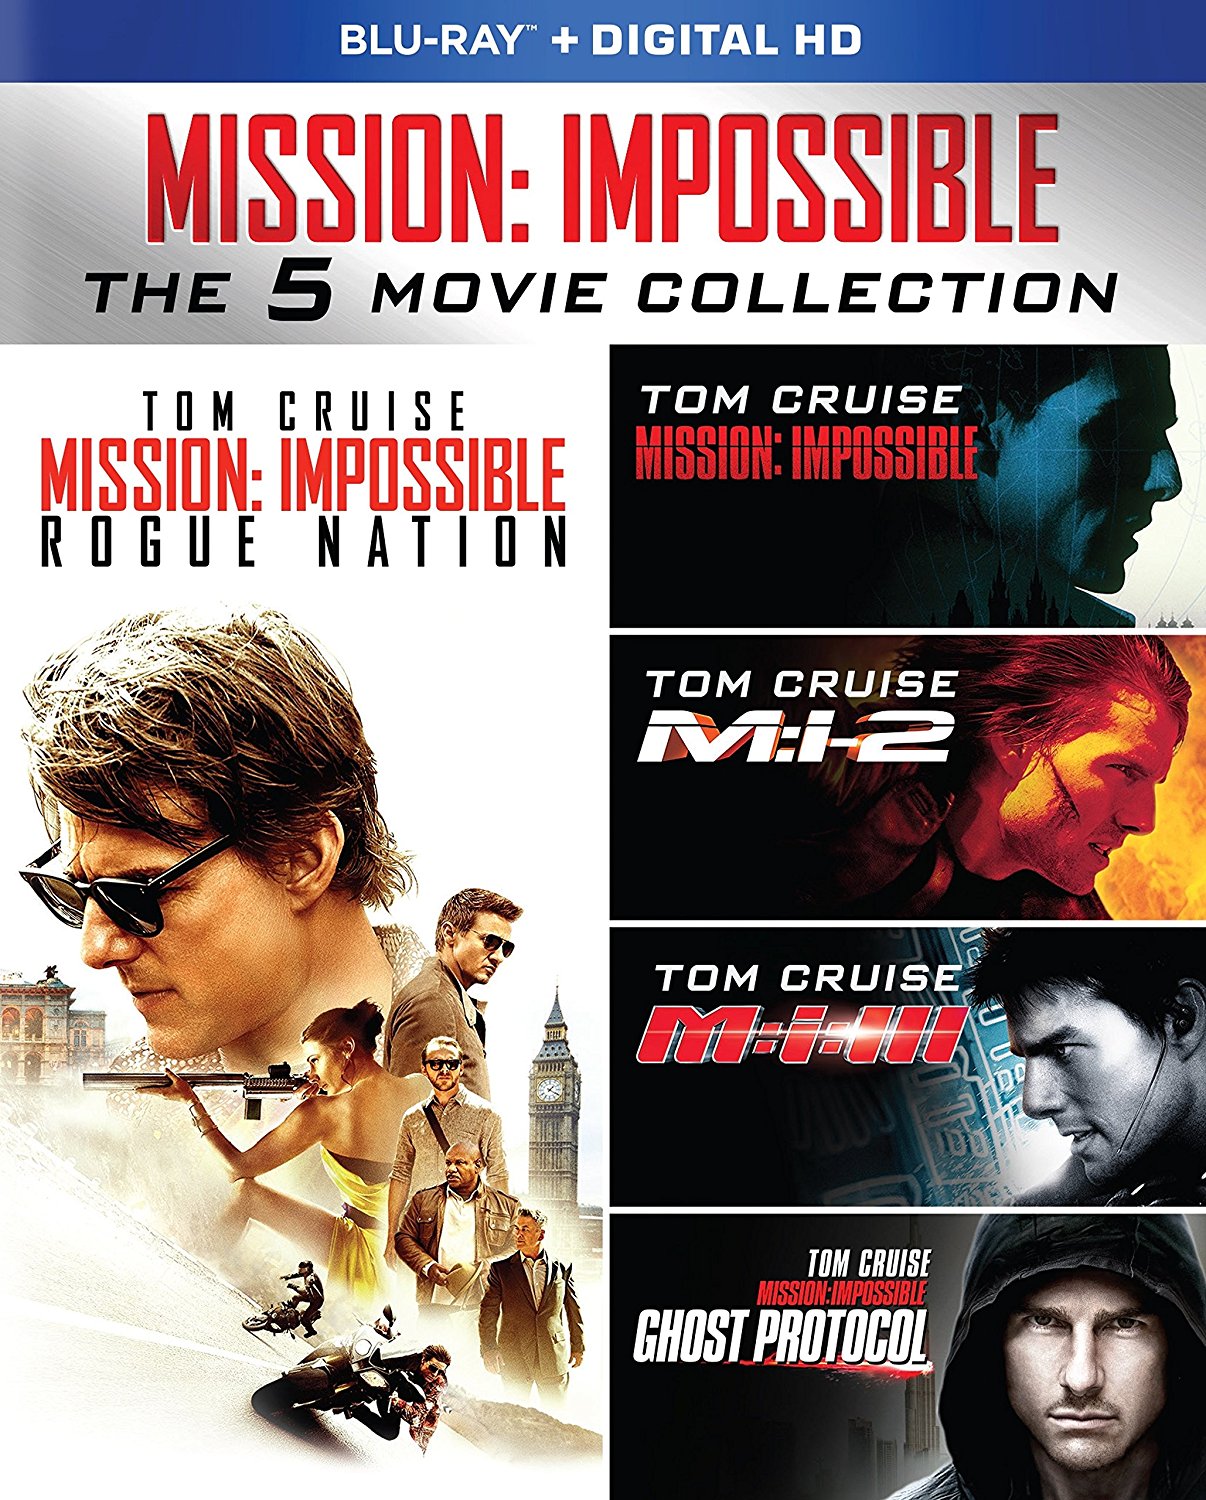 Save on Mission: Impossible -The Five Movie Collection! Just $18.99!